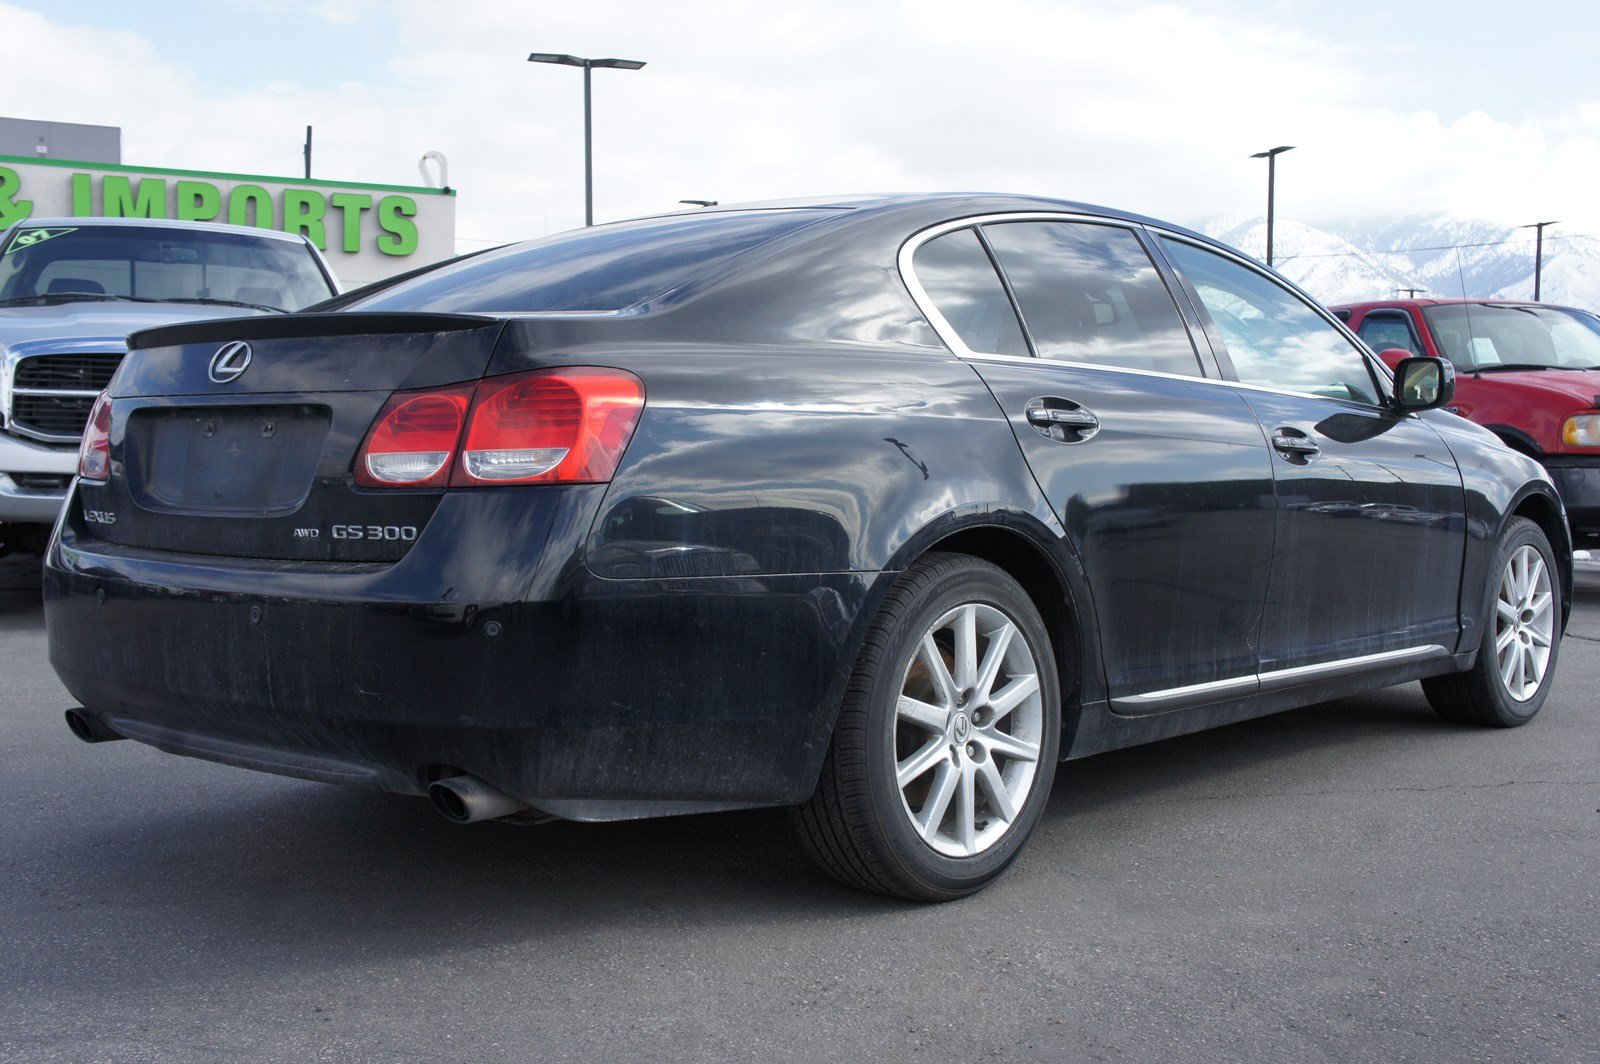 PreOwned 2006 Lexus GS 300 300 4dr Car in Sandy S7586A